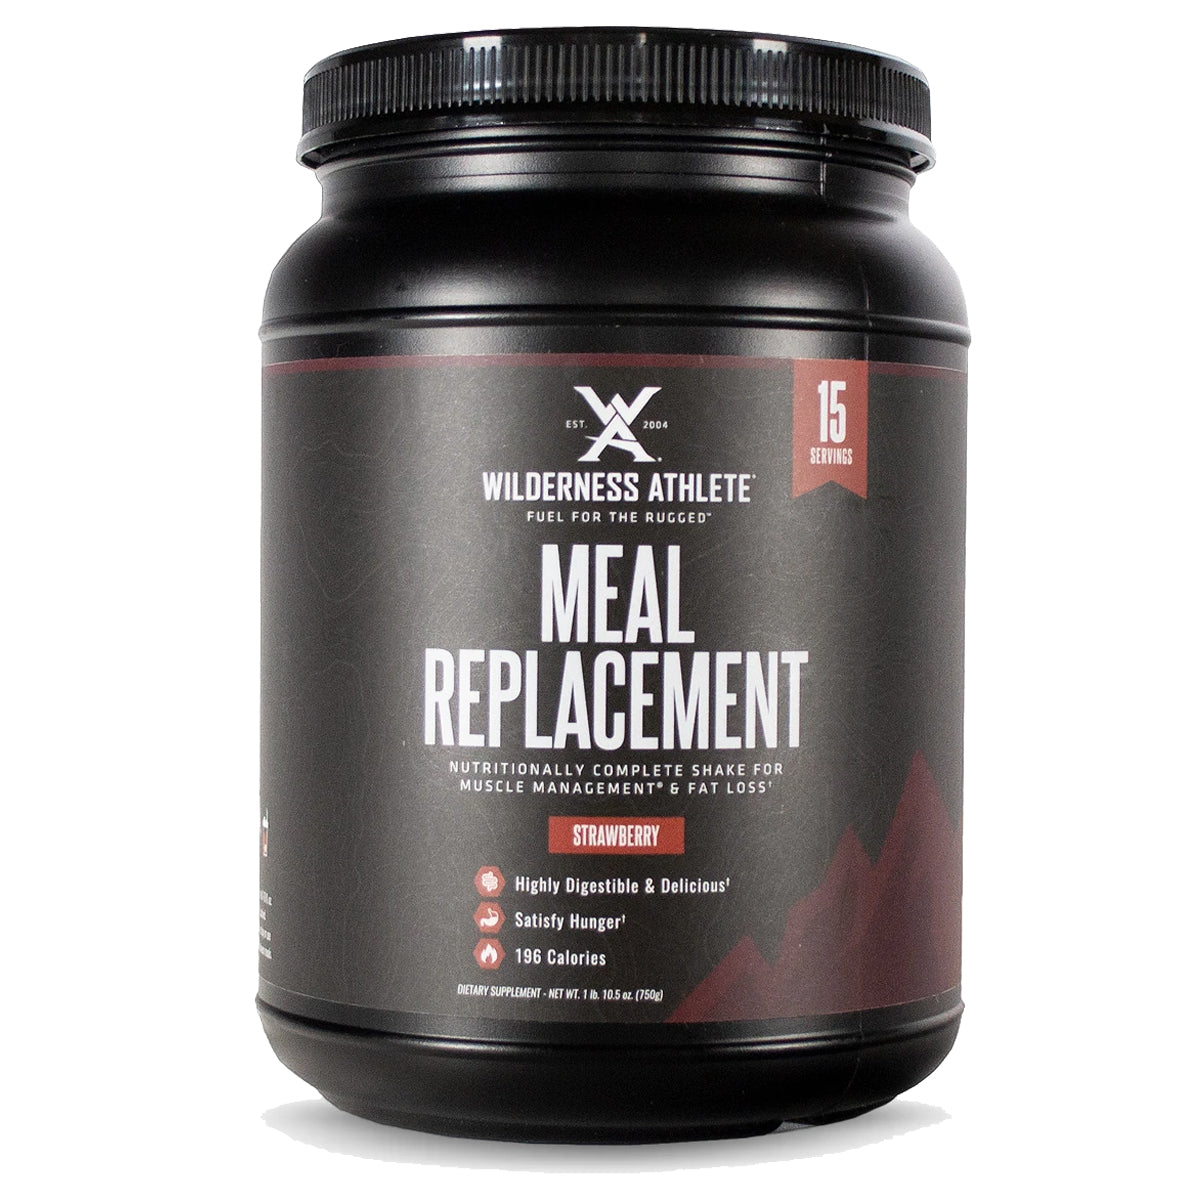 Wilderness Athlete Meal Replacement Shake in  by GOHUNT | Wilderness Athlete - GOHUNT Shop